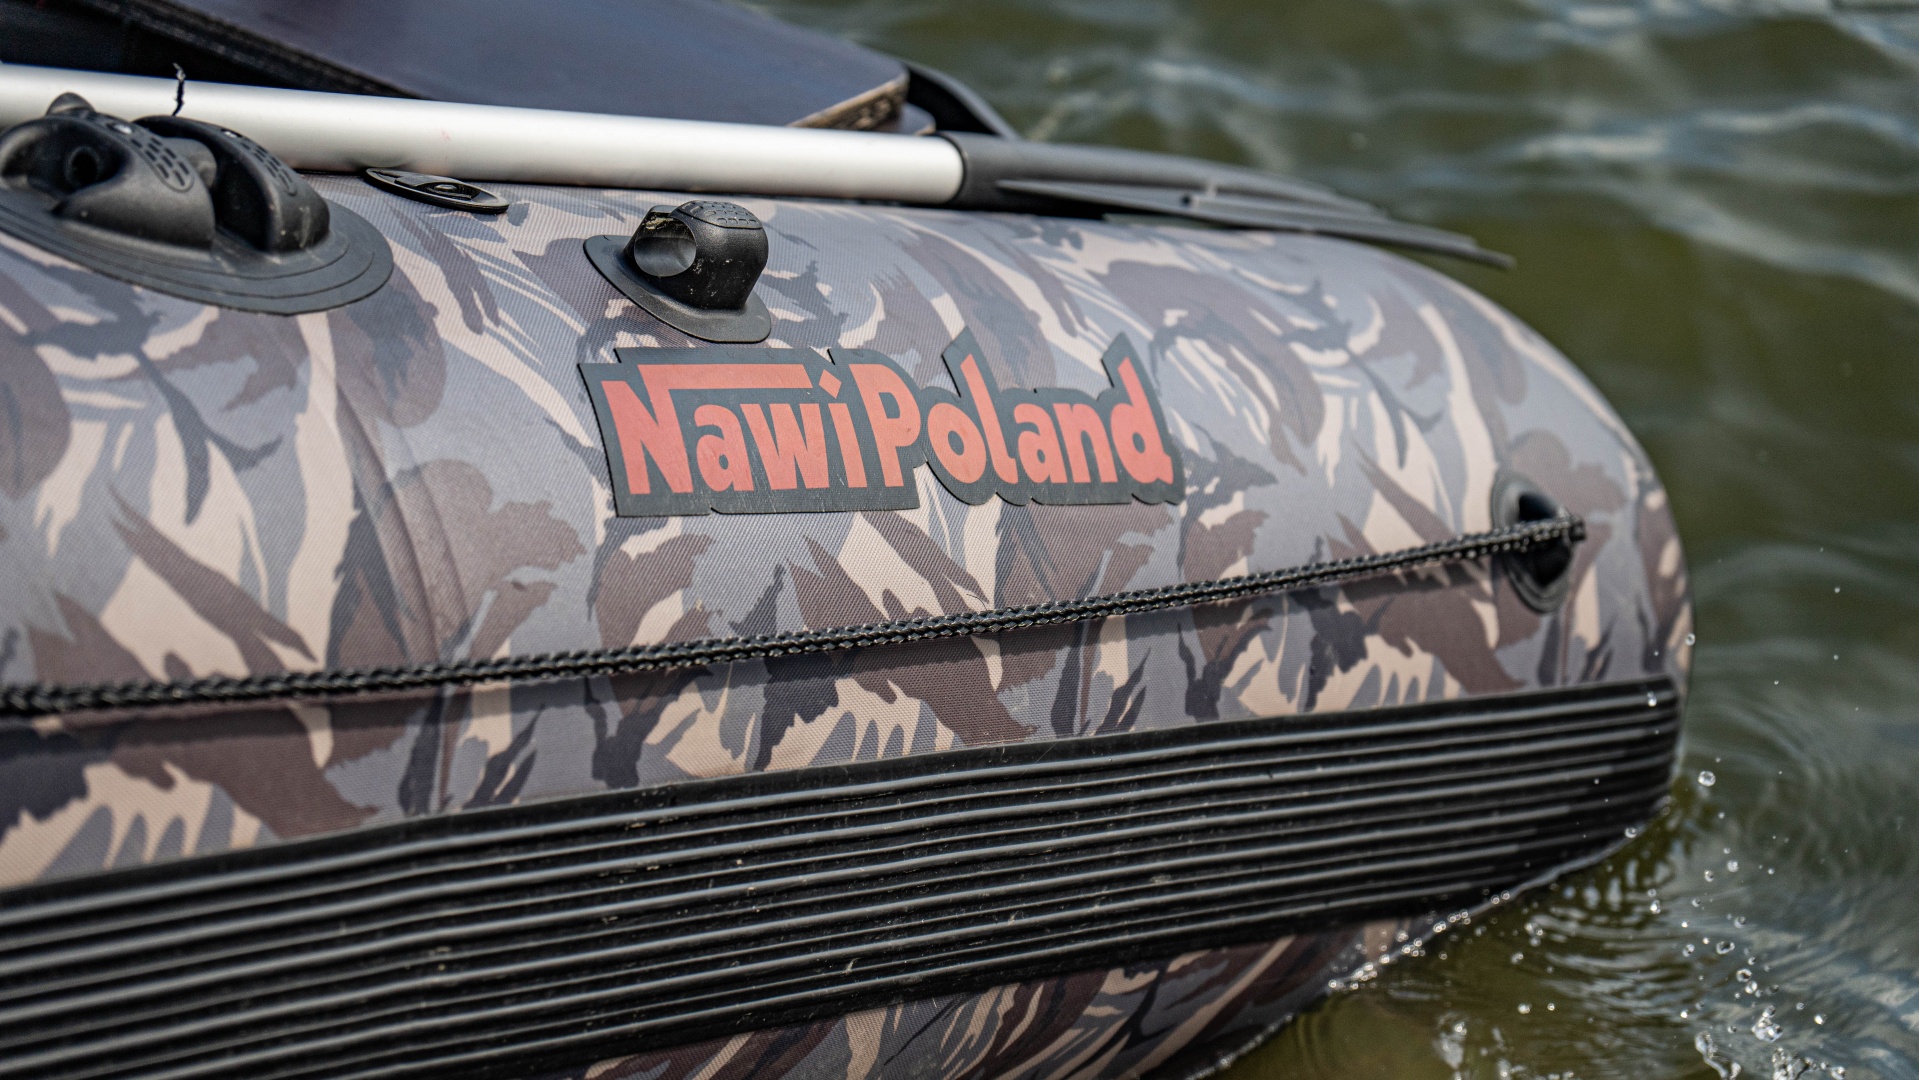 NawiPoland CAT 400 Inflatable Boat - Катамаран